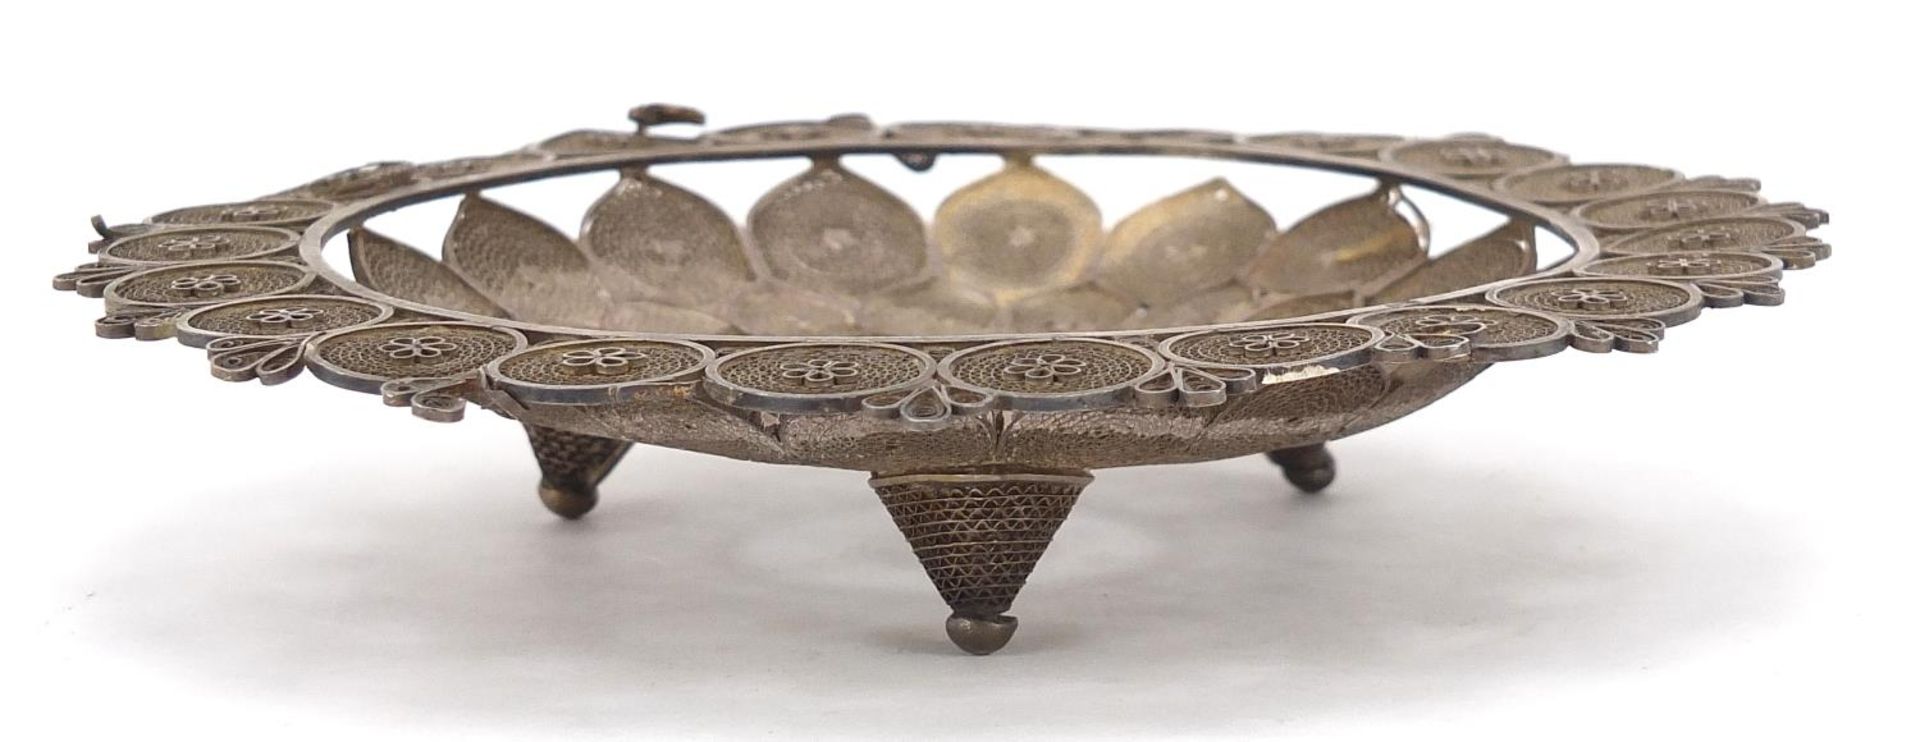 Indian silver coloured metal filigree footed dish, 18cm in diameter, 187.4g - Image 3 of 4